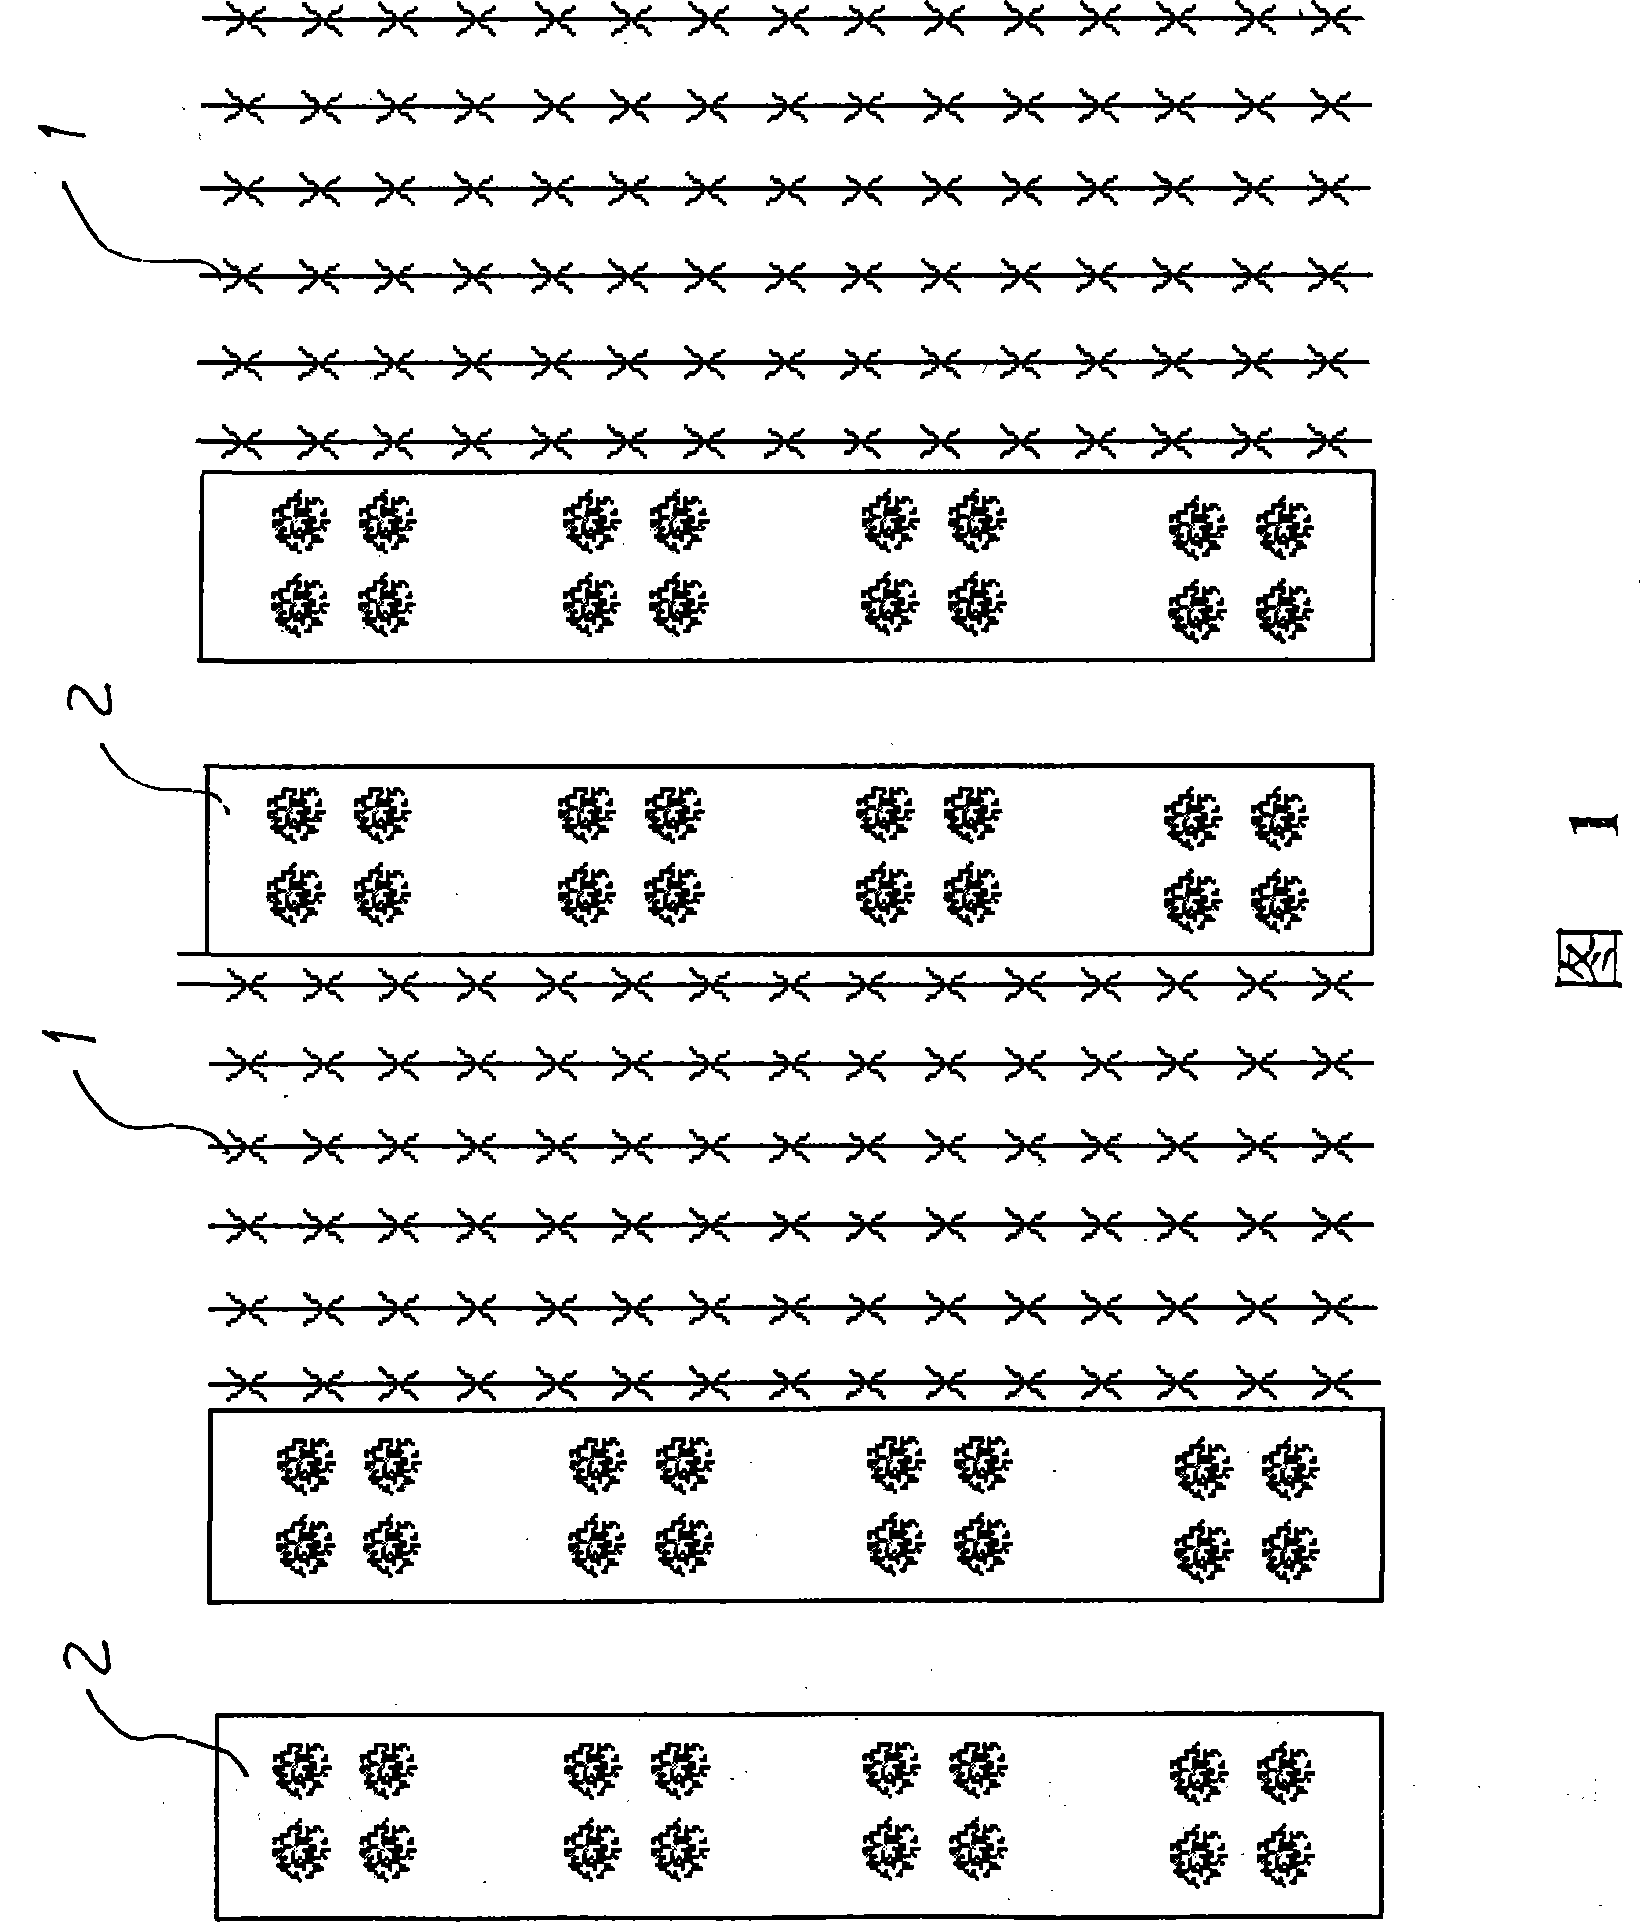 Method for alternating planting and cultivation